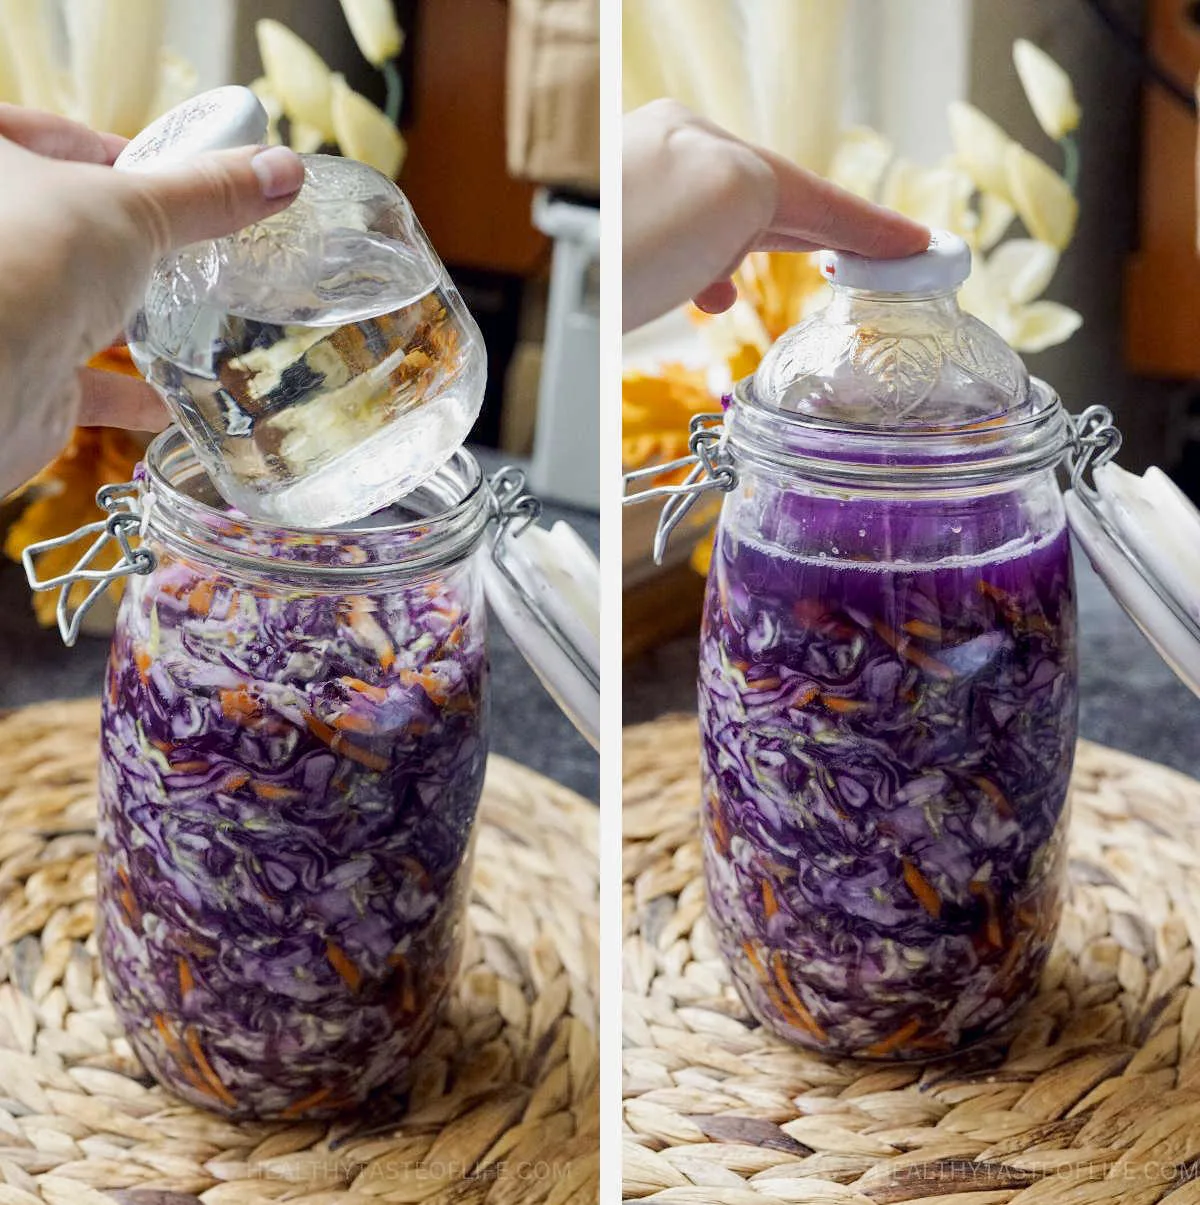 Process shots showing how to place weight on sauerkraut to release juice when storing.